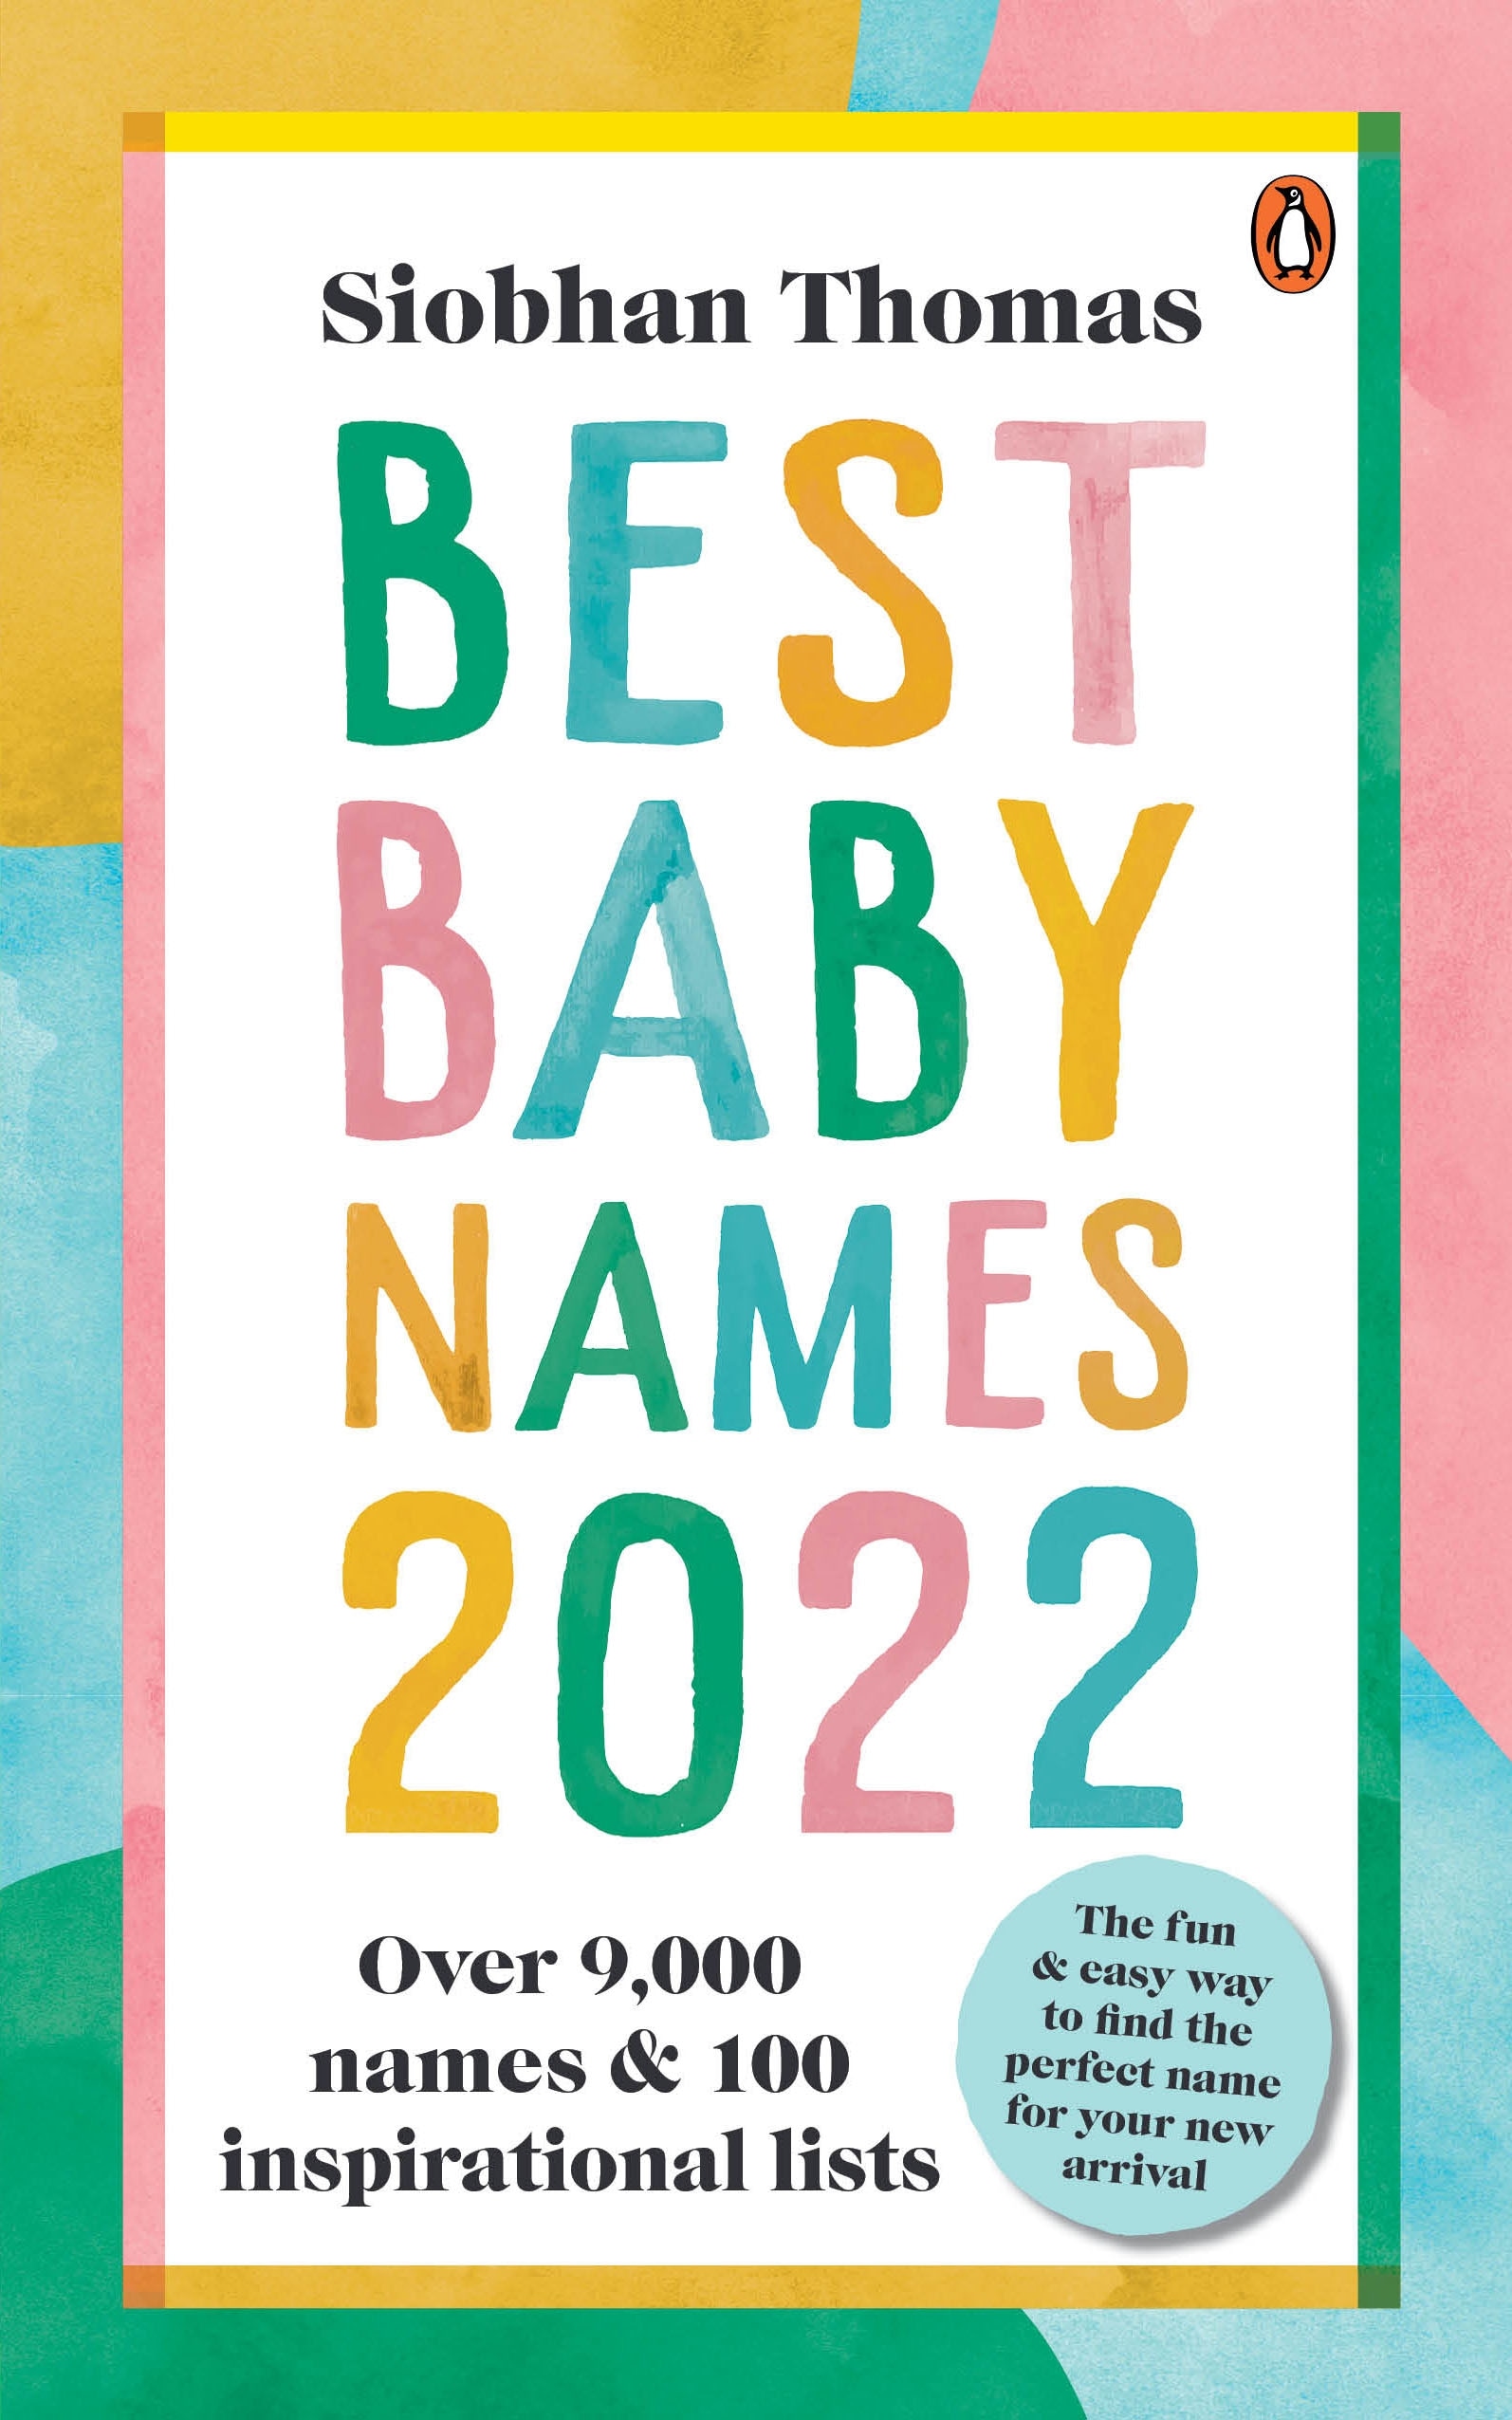 Book “Best Baby Names 2022” by Siobhan Thomas — September 30, 2021